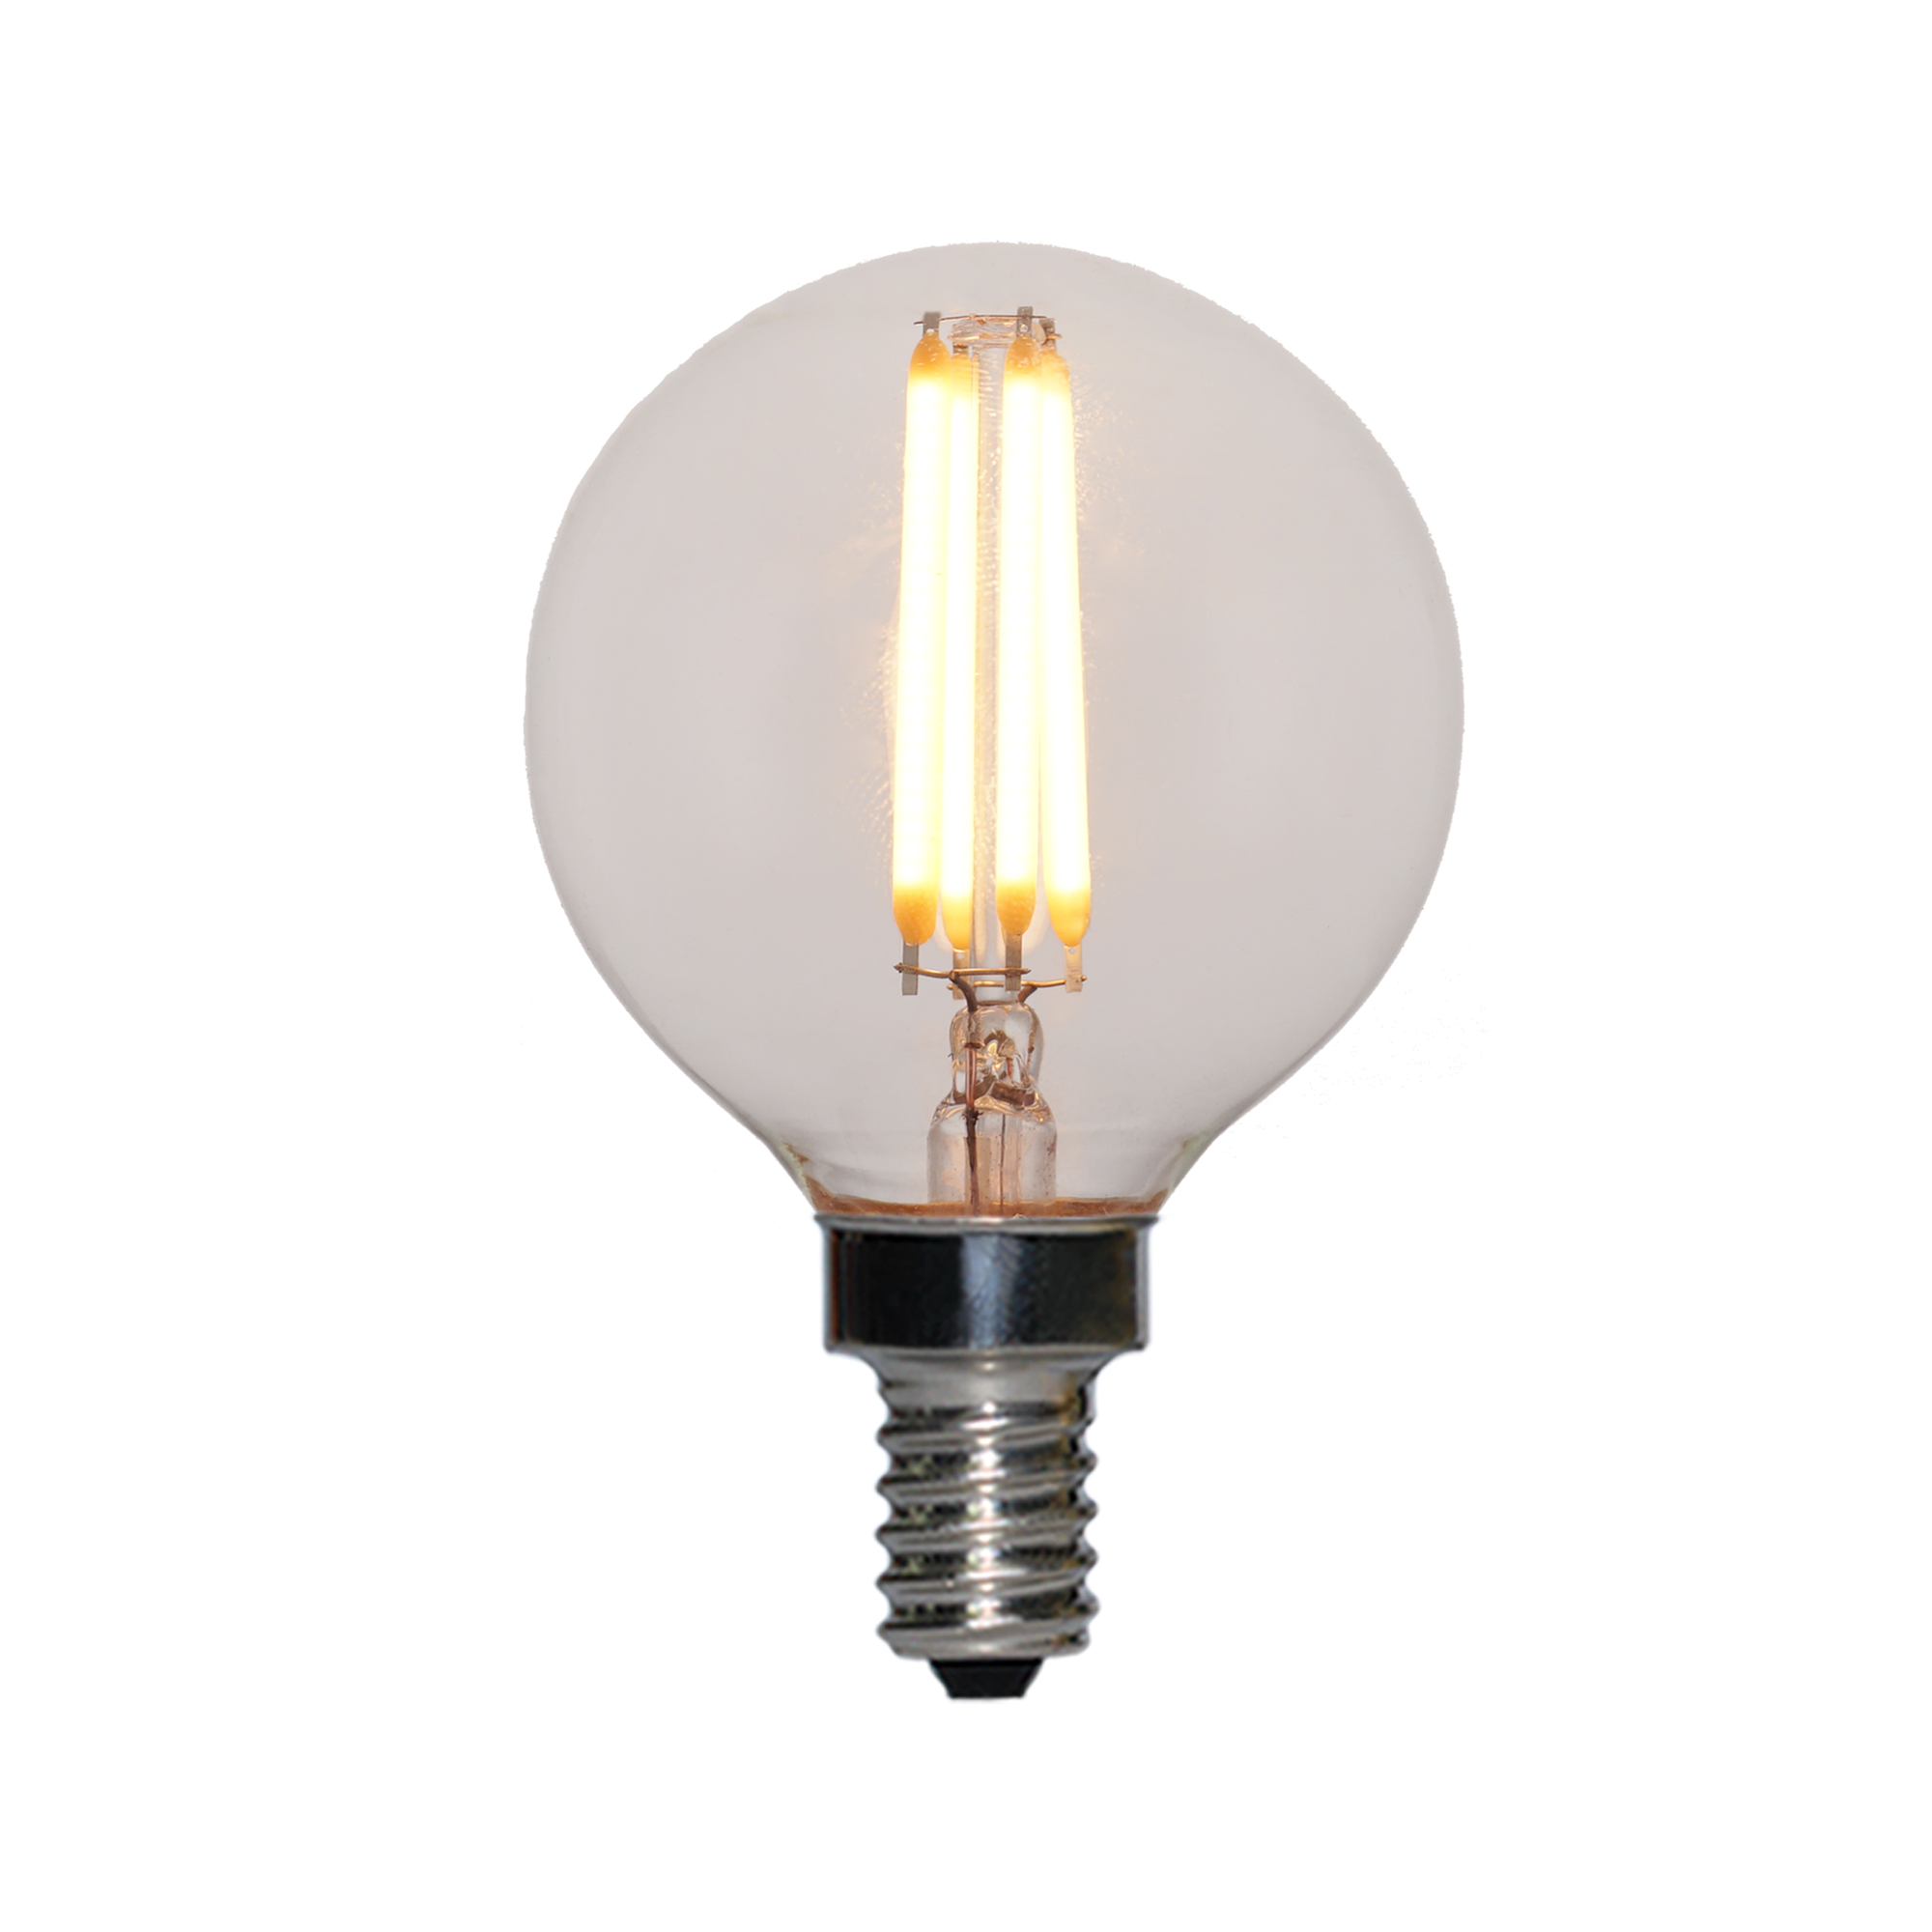 China Wholesale E27 Vintage Bulb Factory -
 UL ES title 20, Title 24 and JA8 Certified  listed led Edison bulbs G16.5 A19 S19 S21 G25 G30 G40 – Omita